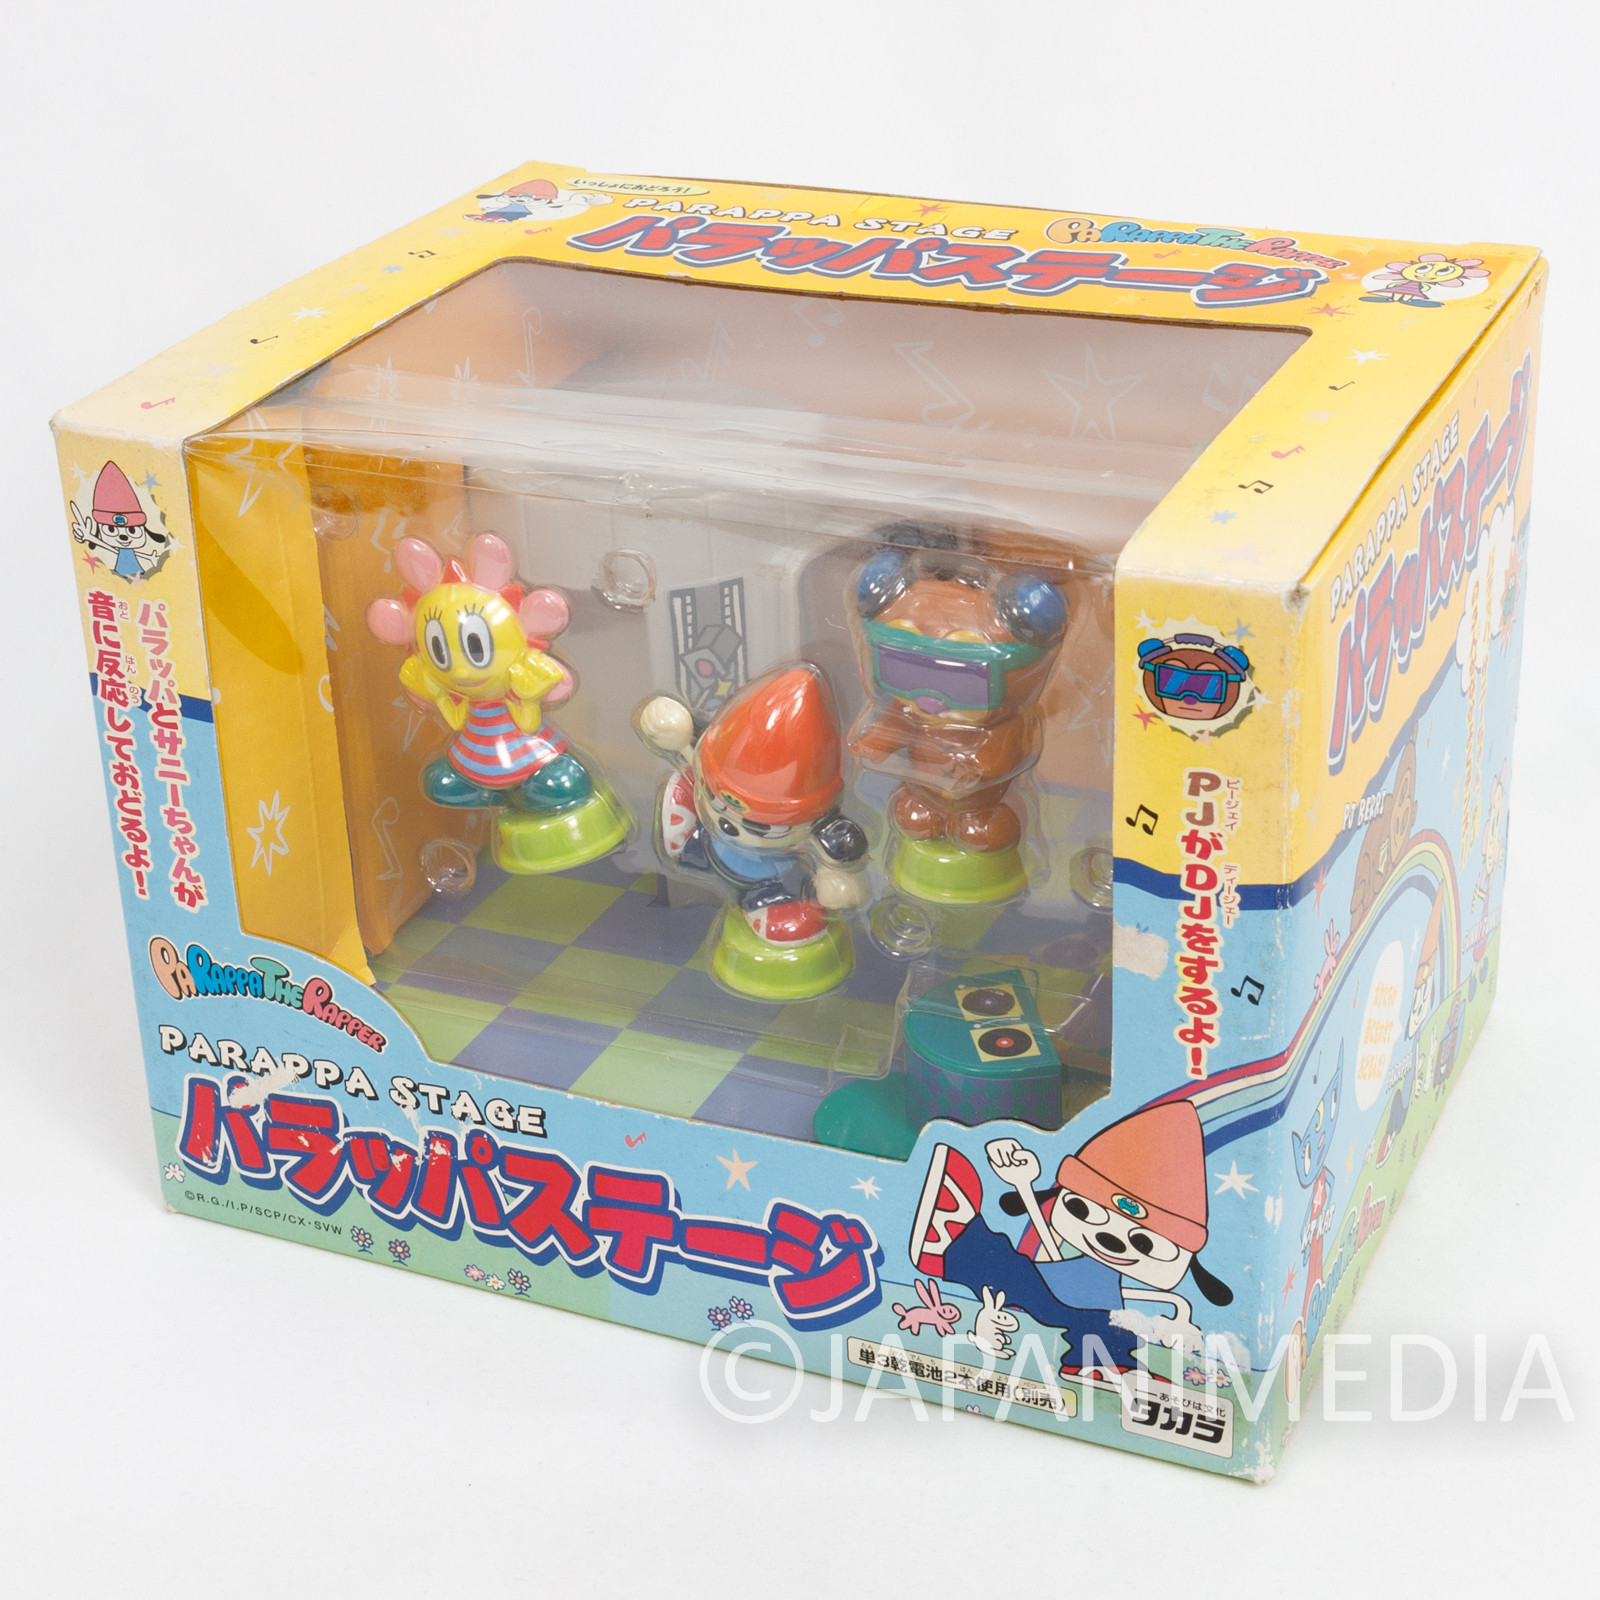 Parappa The Rapper Parappa Stage Sound Sensor Action Figure JAPAN GAME